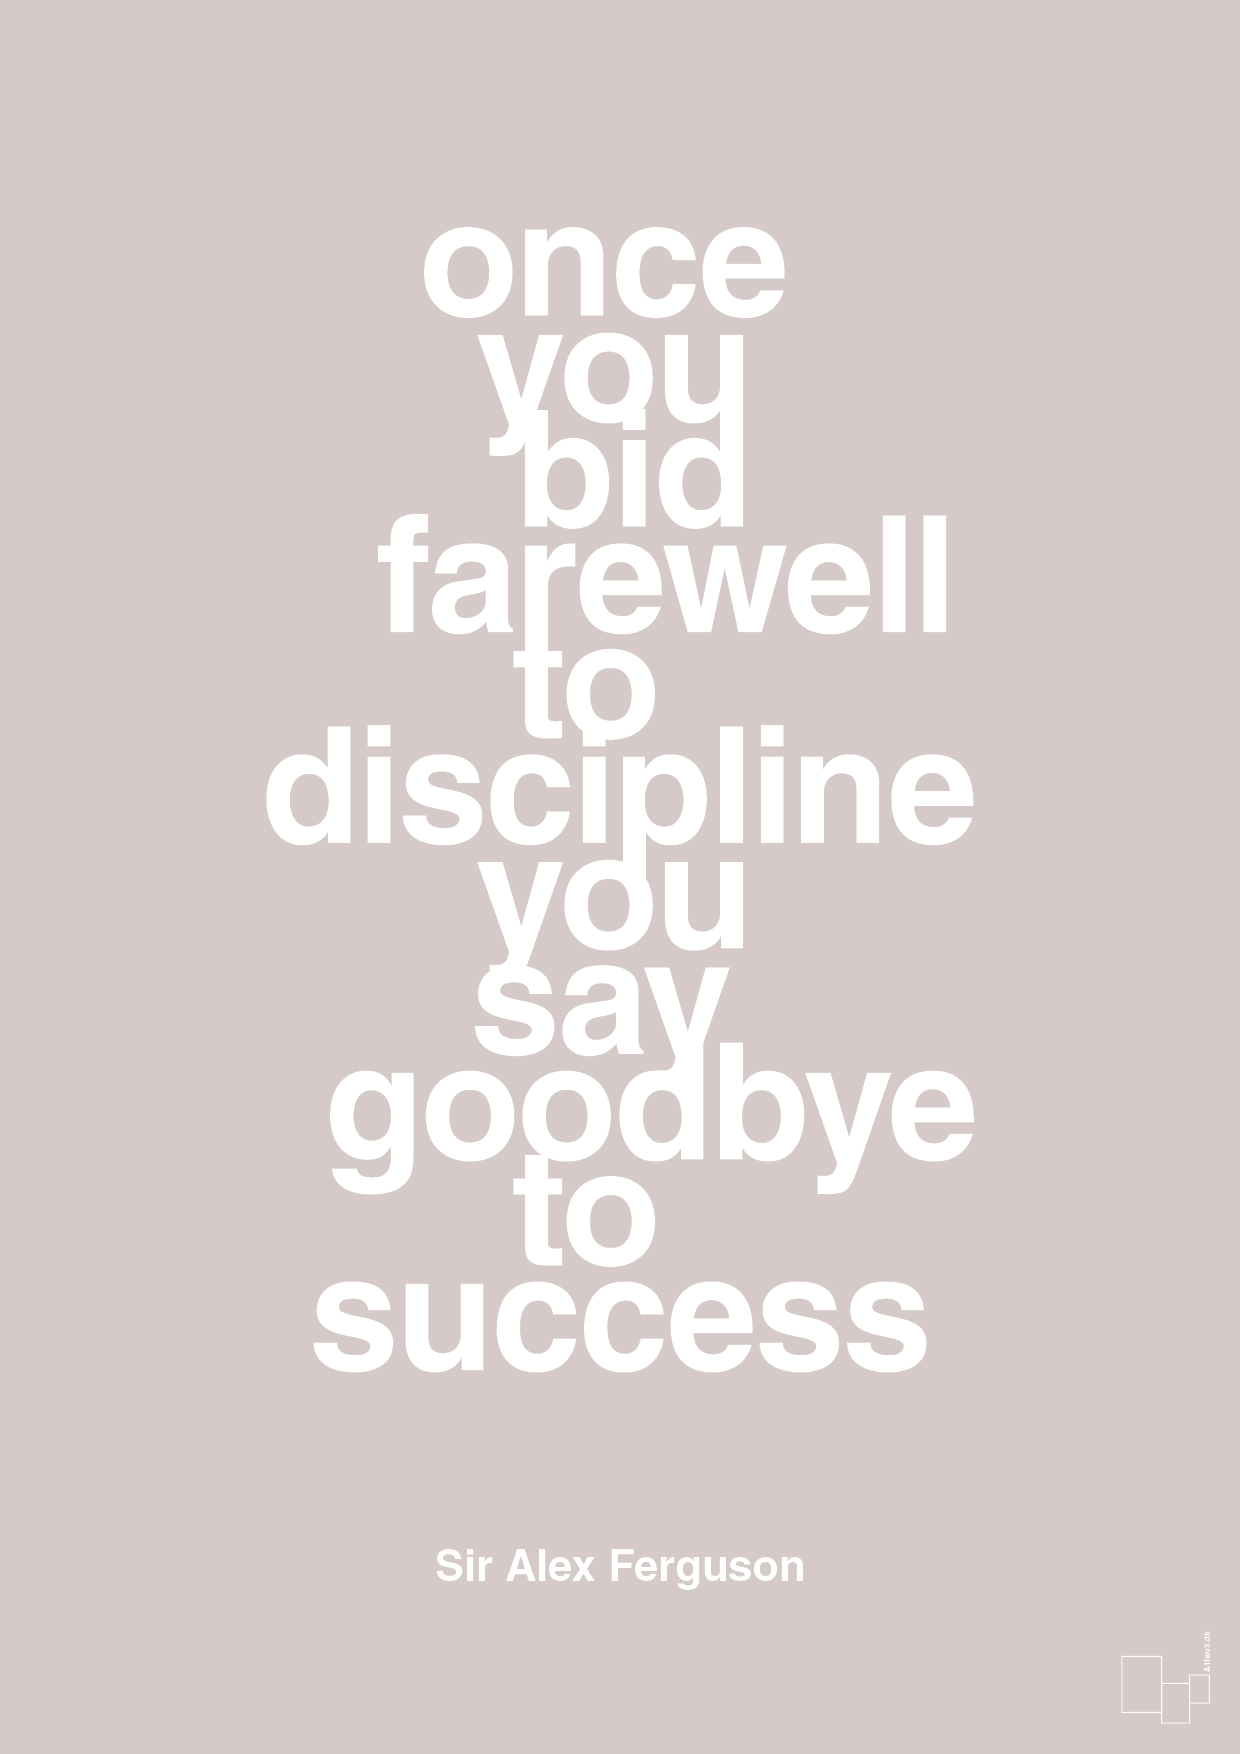 once you bid farewell to discipline you say goodbye to success - Plakat med Citater i Broken Beige